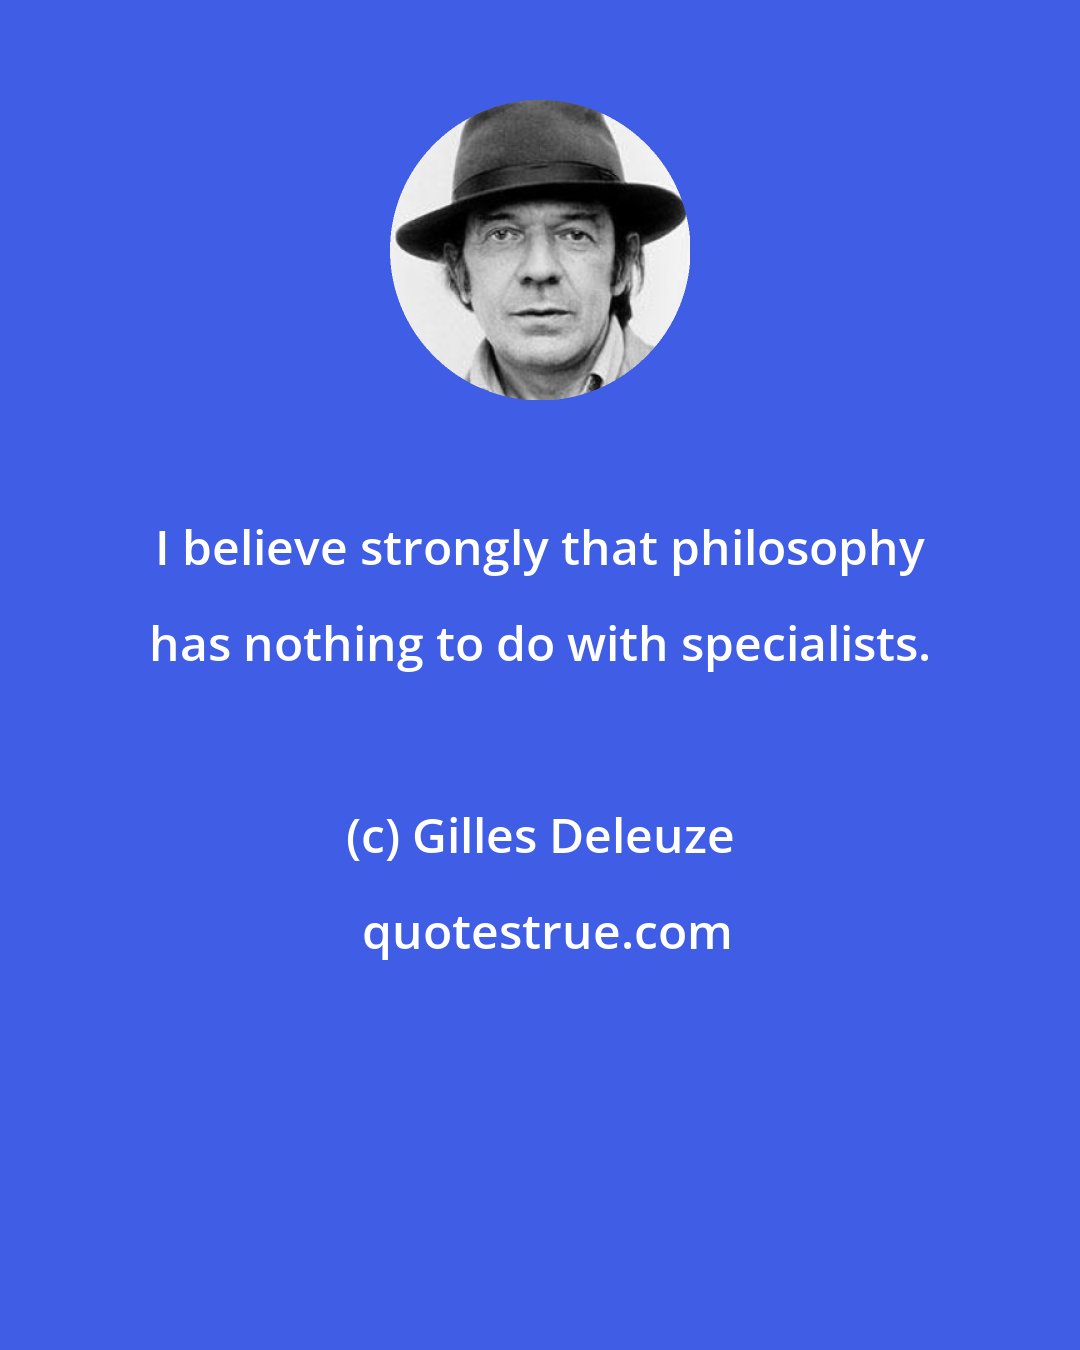 Gilles Deleuze: I believe strongly that philosophy has nothing to do with specialists.